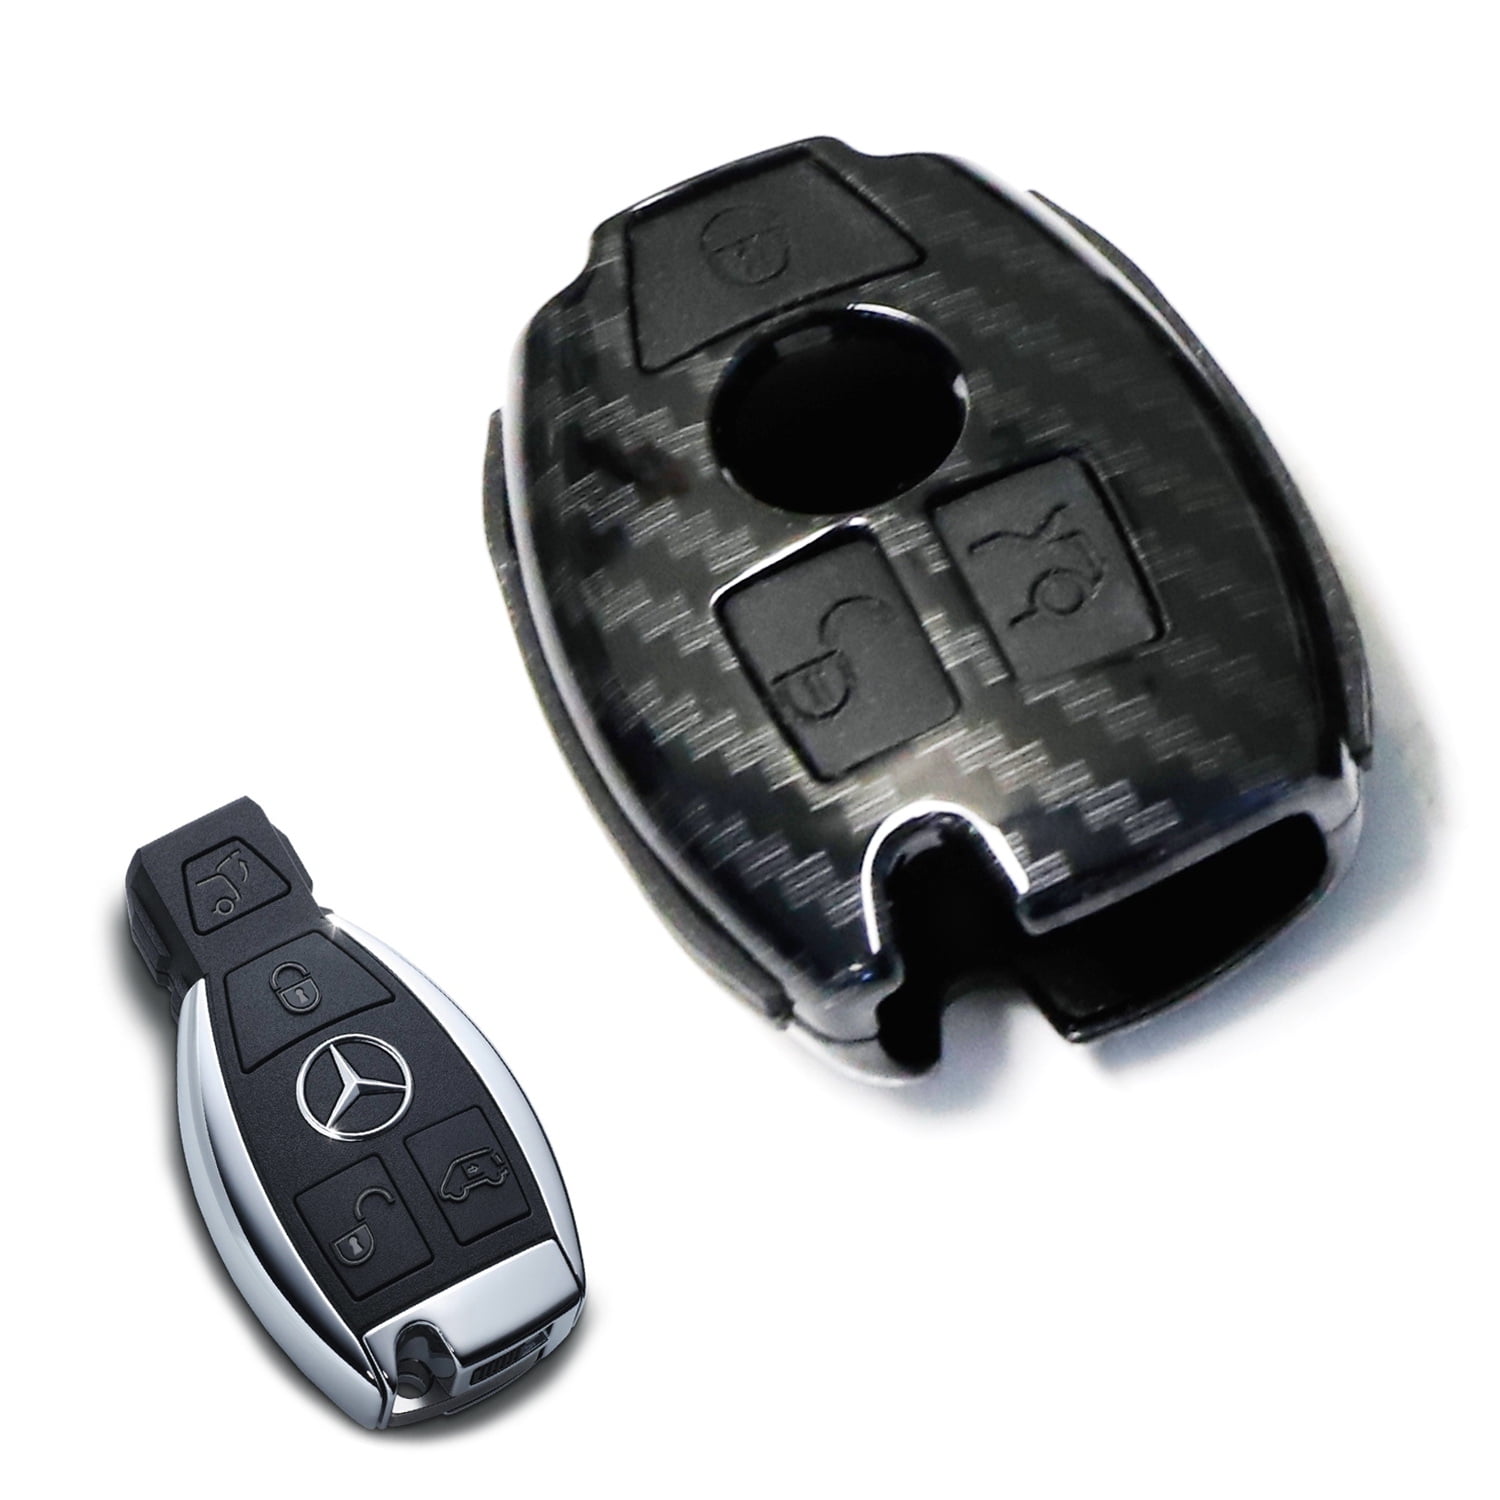 Key Fob Protective Case for Mercedes Benz C E M S CLA CLS CLK GLC GLK G Class Premium Soft TPU Full Cover Protection Remote Keyless Entry Key Fob Shell Smof for Mercedes Benz Key Fob Cover Silver 